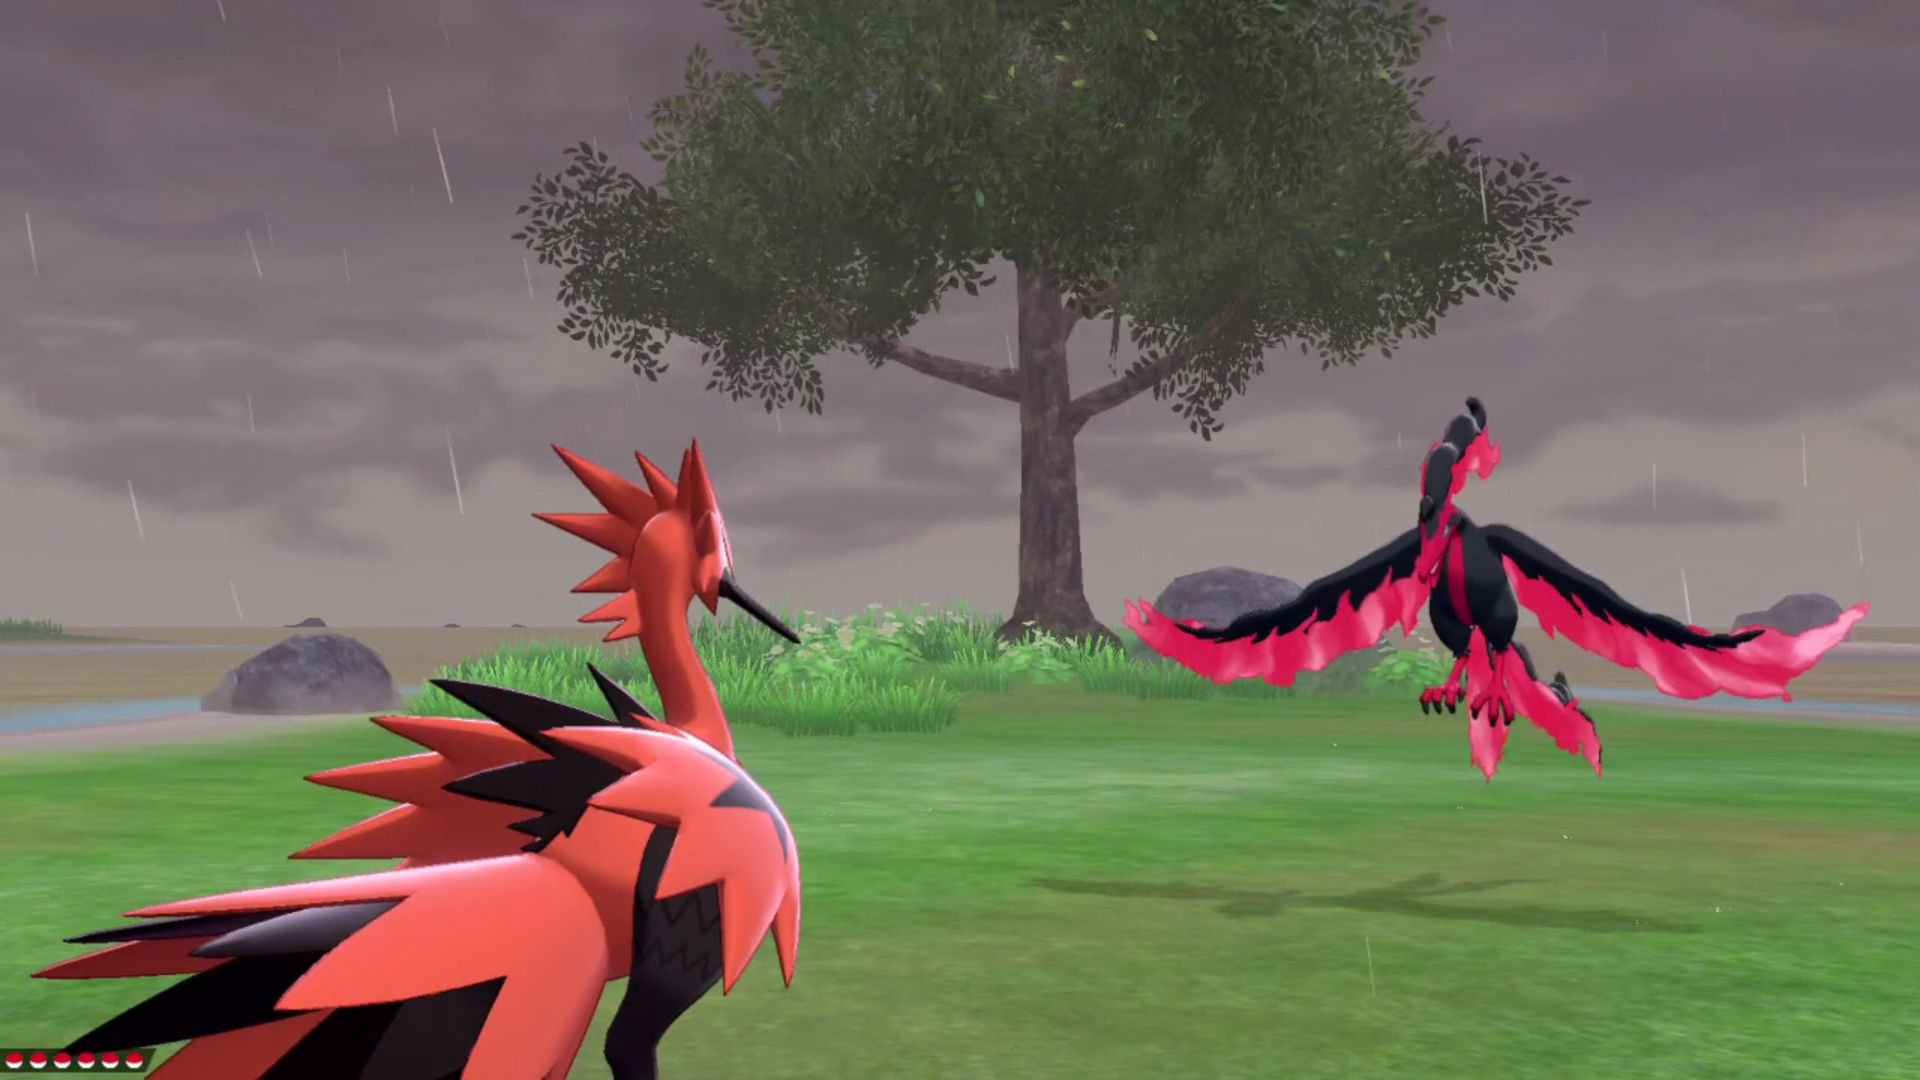 Pokémon Sword and Shield Galarian Moltres: Encounter with Galarian Moltres in a field. Trainer is using Galarian Zapdos.